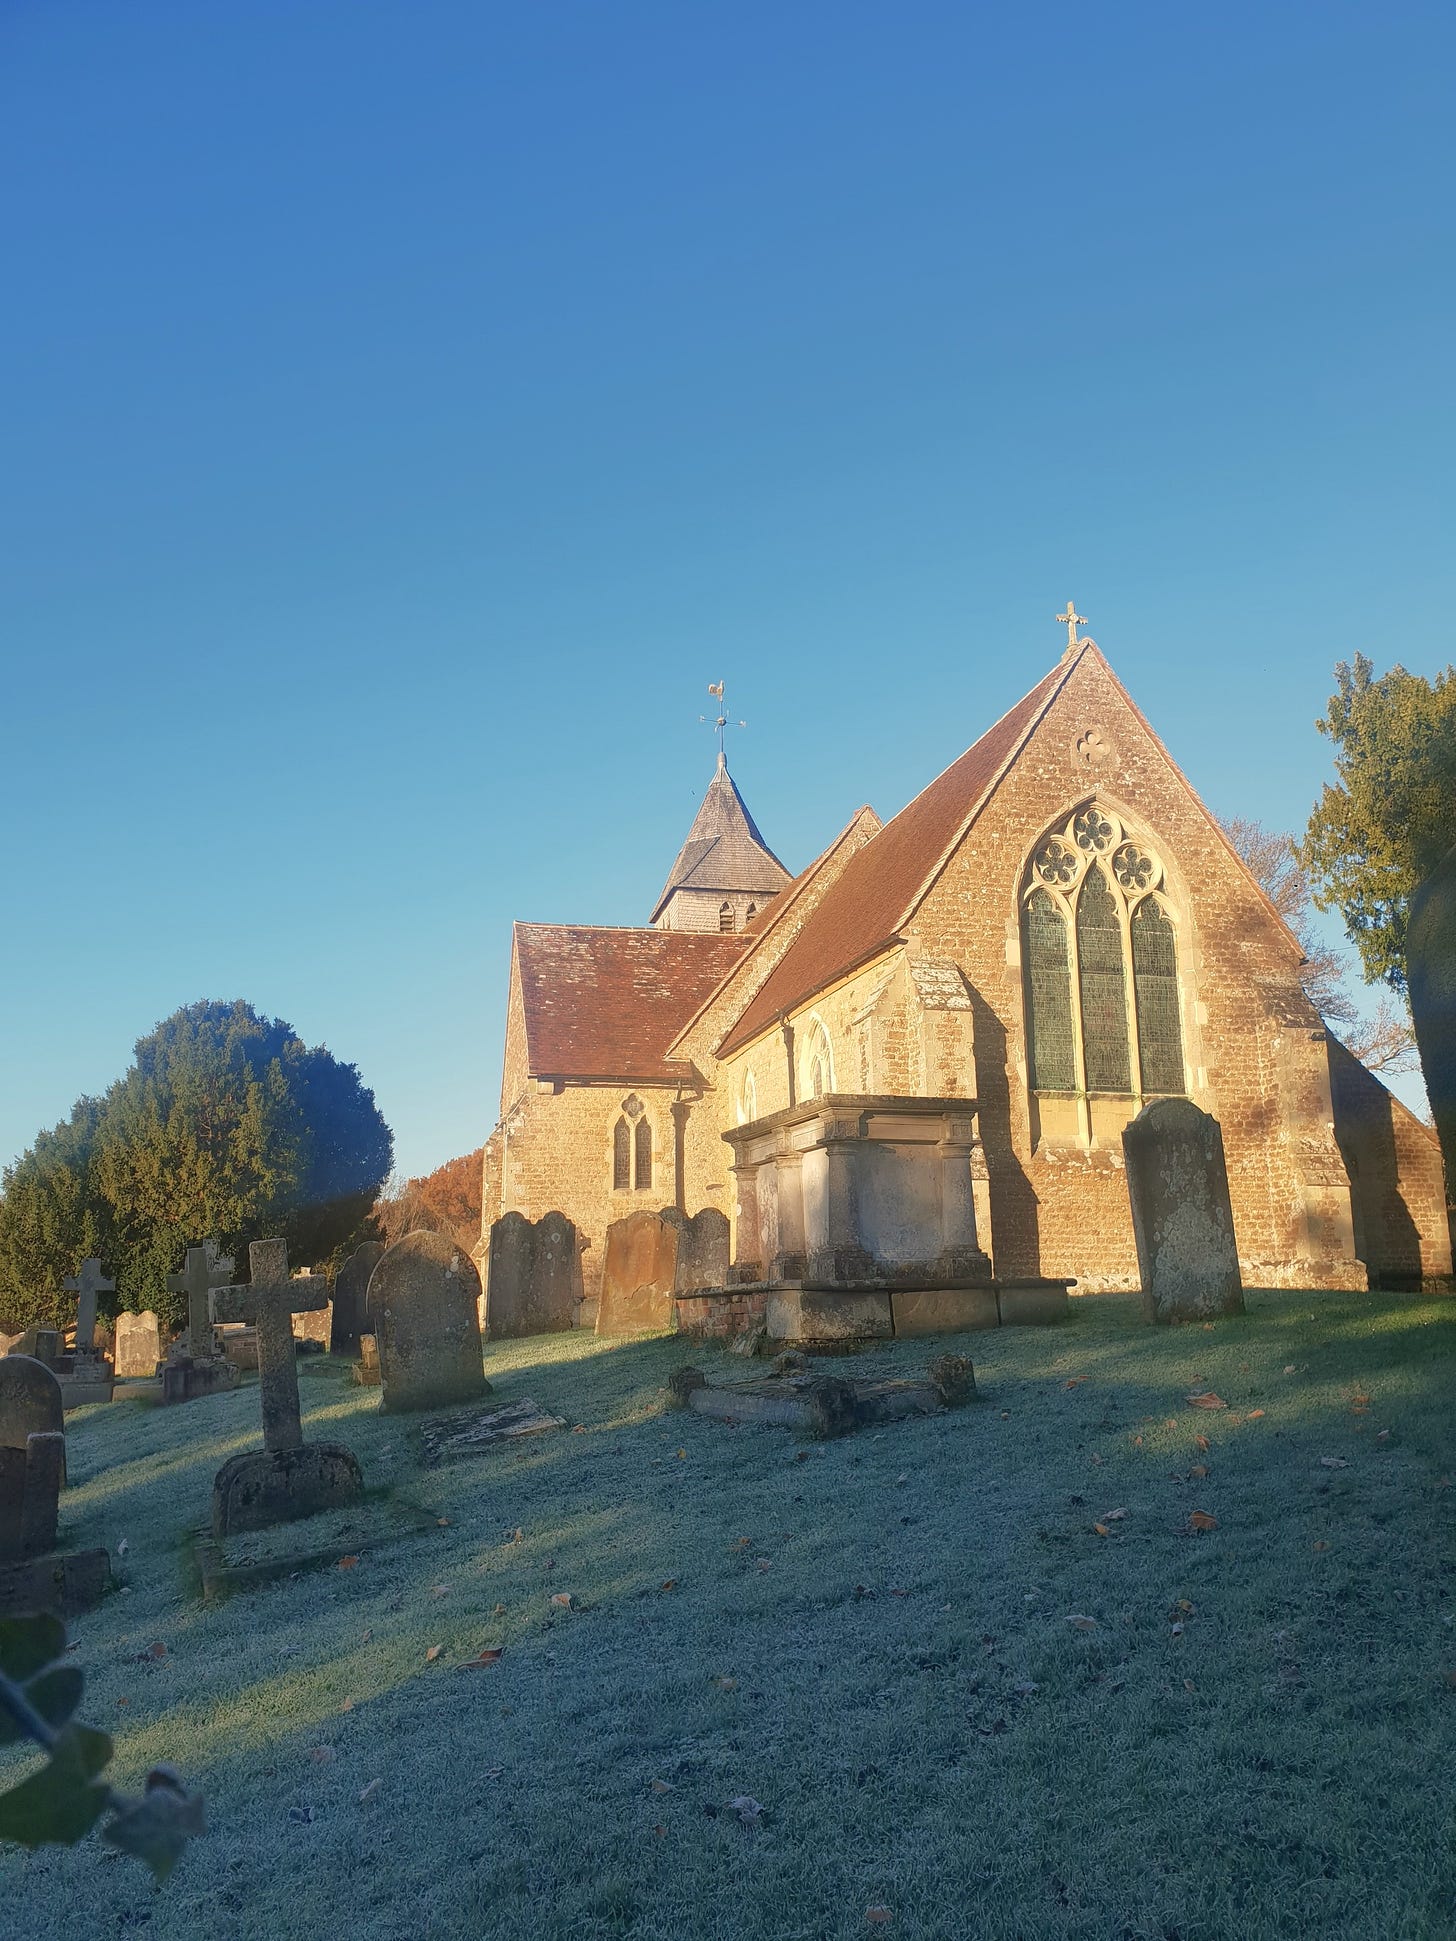 An English country church in a graveyard covered in frost